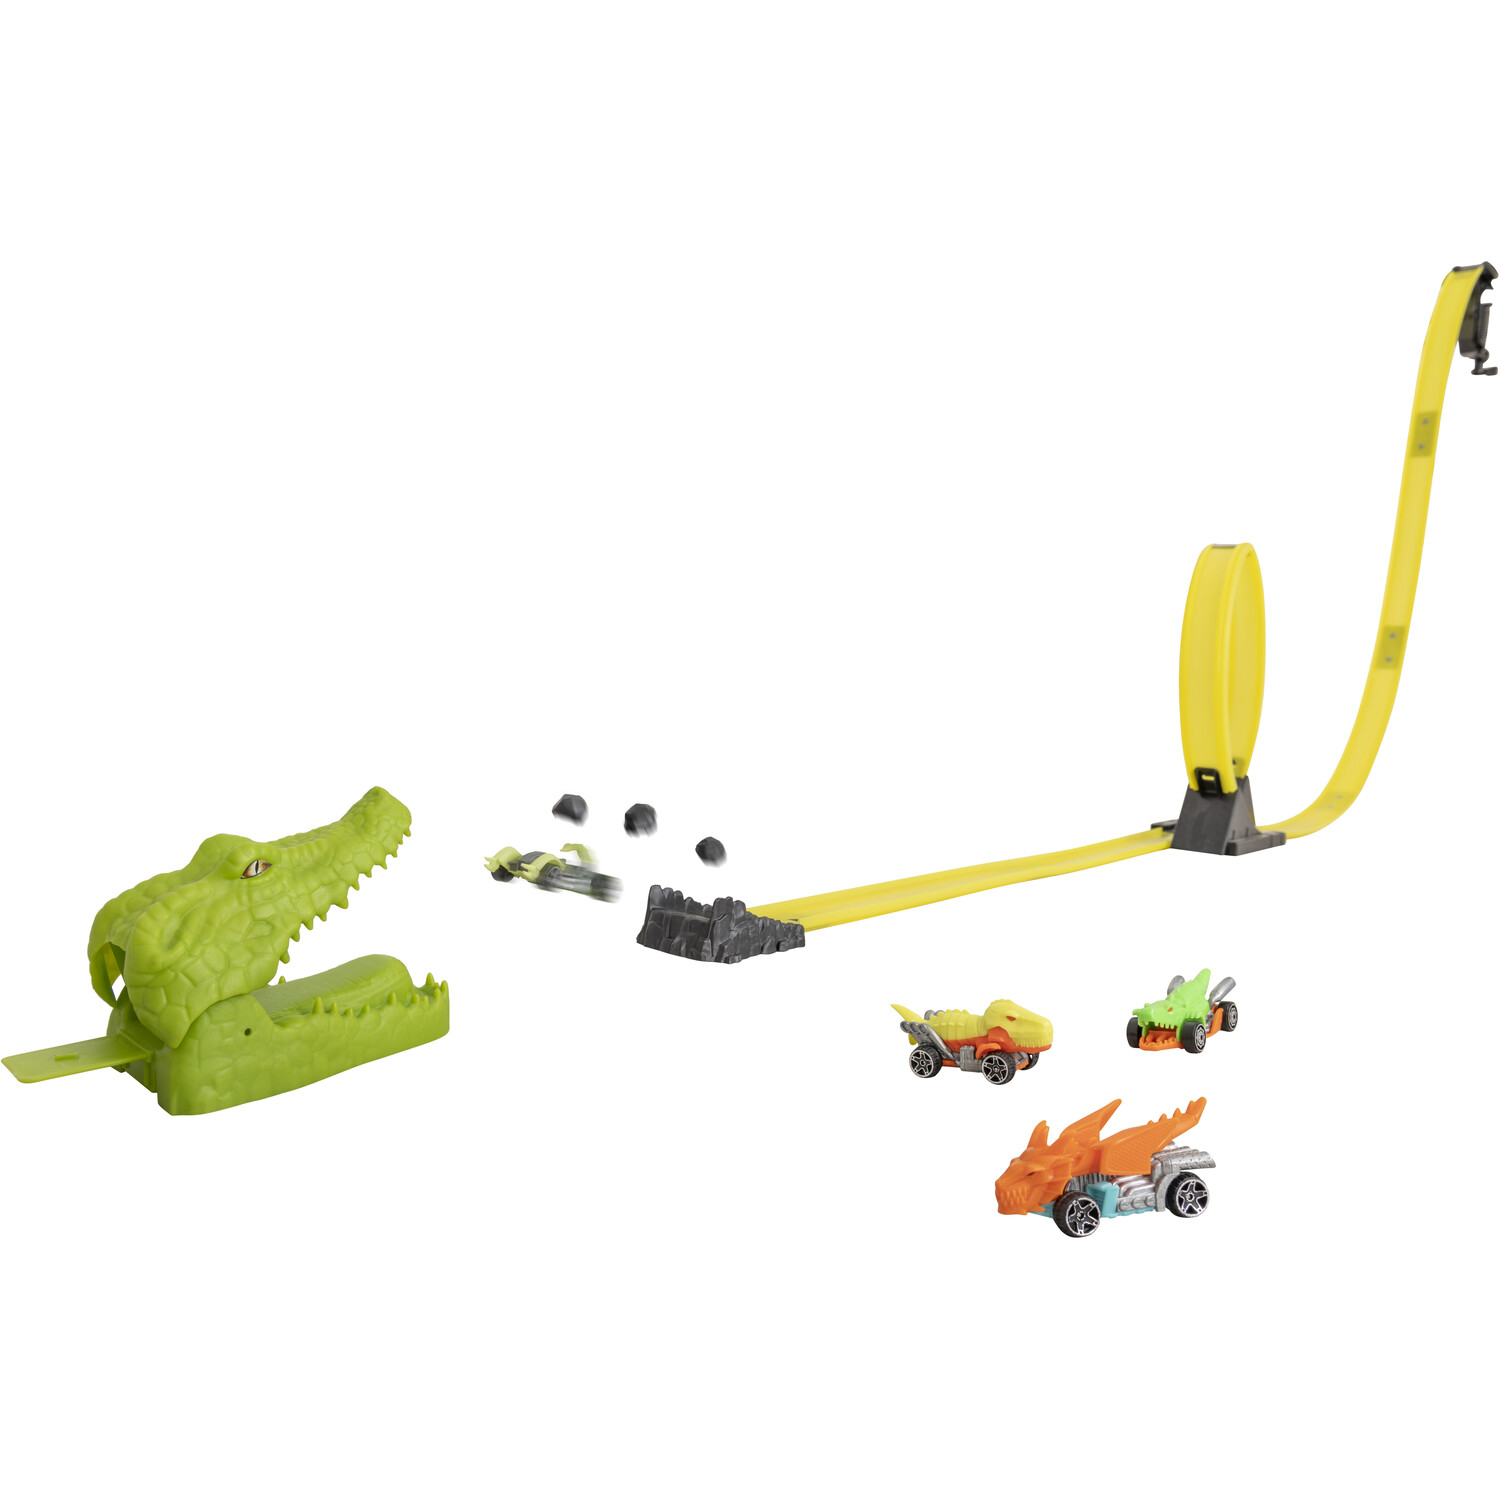 Teamsterz Croc Attack Track Playset Image 1